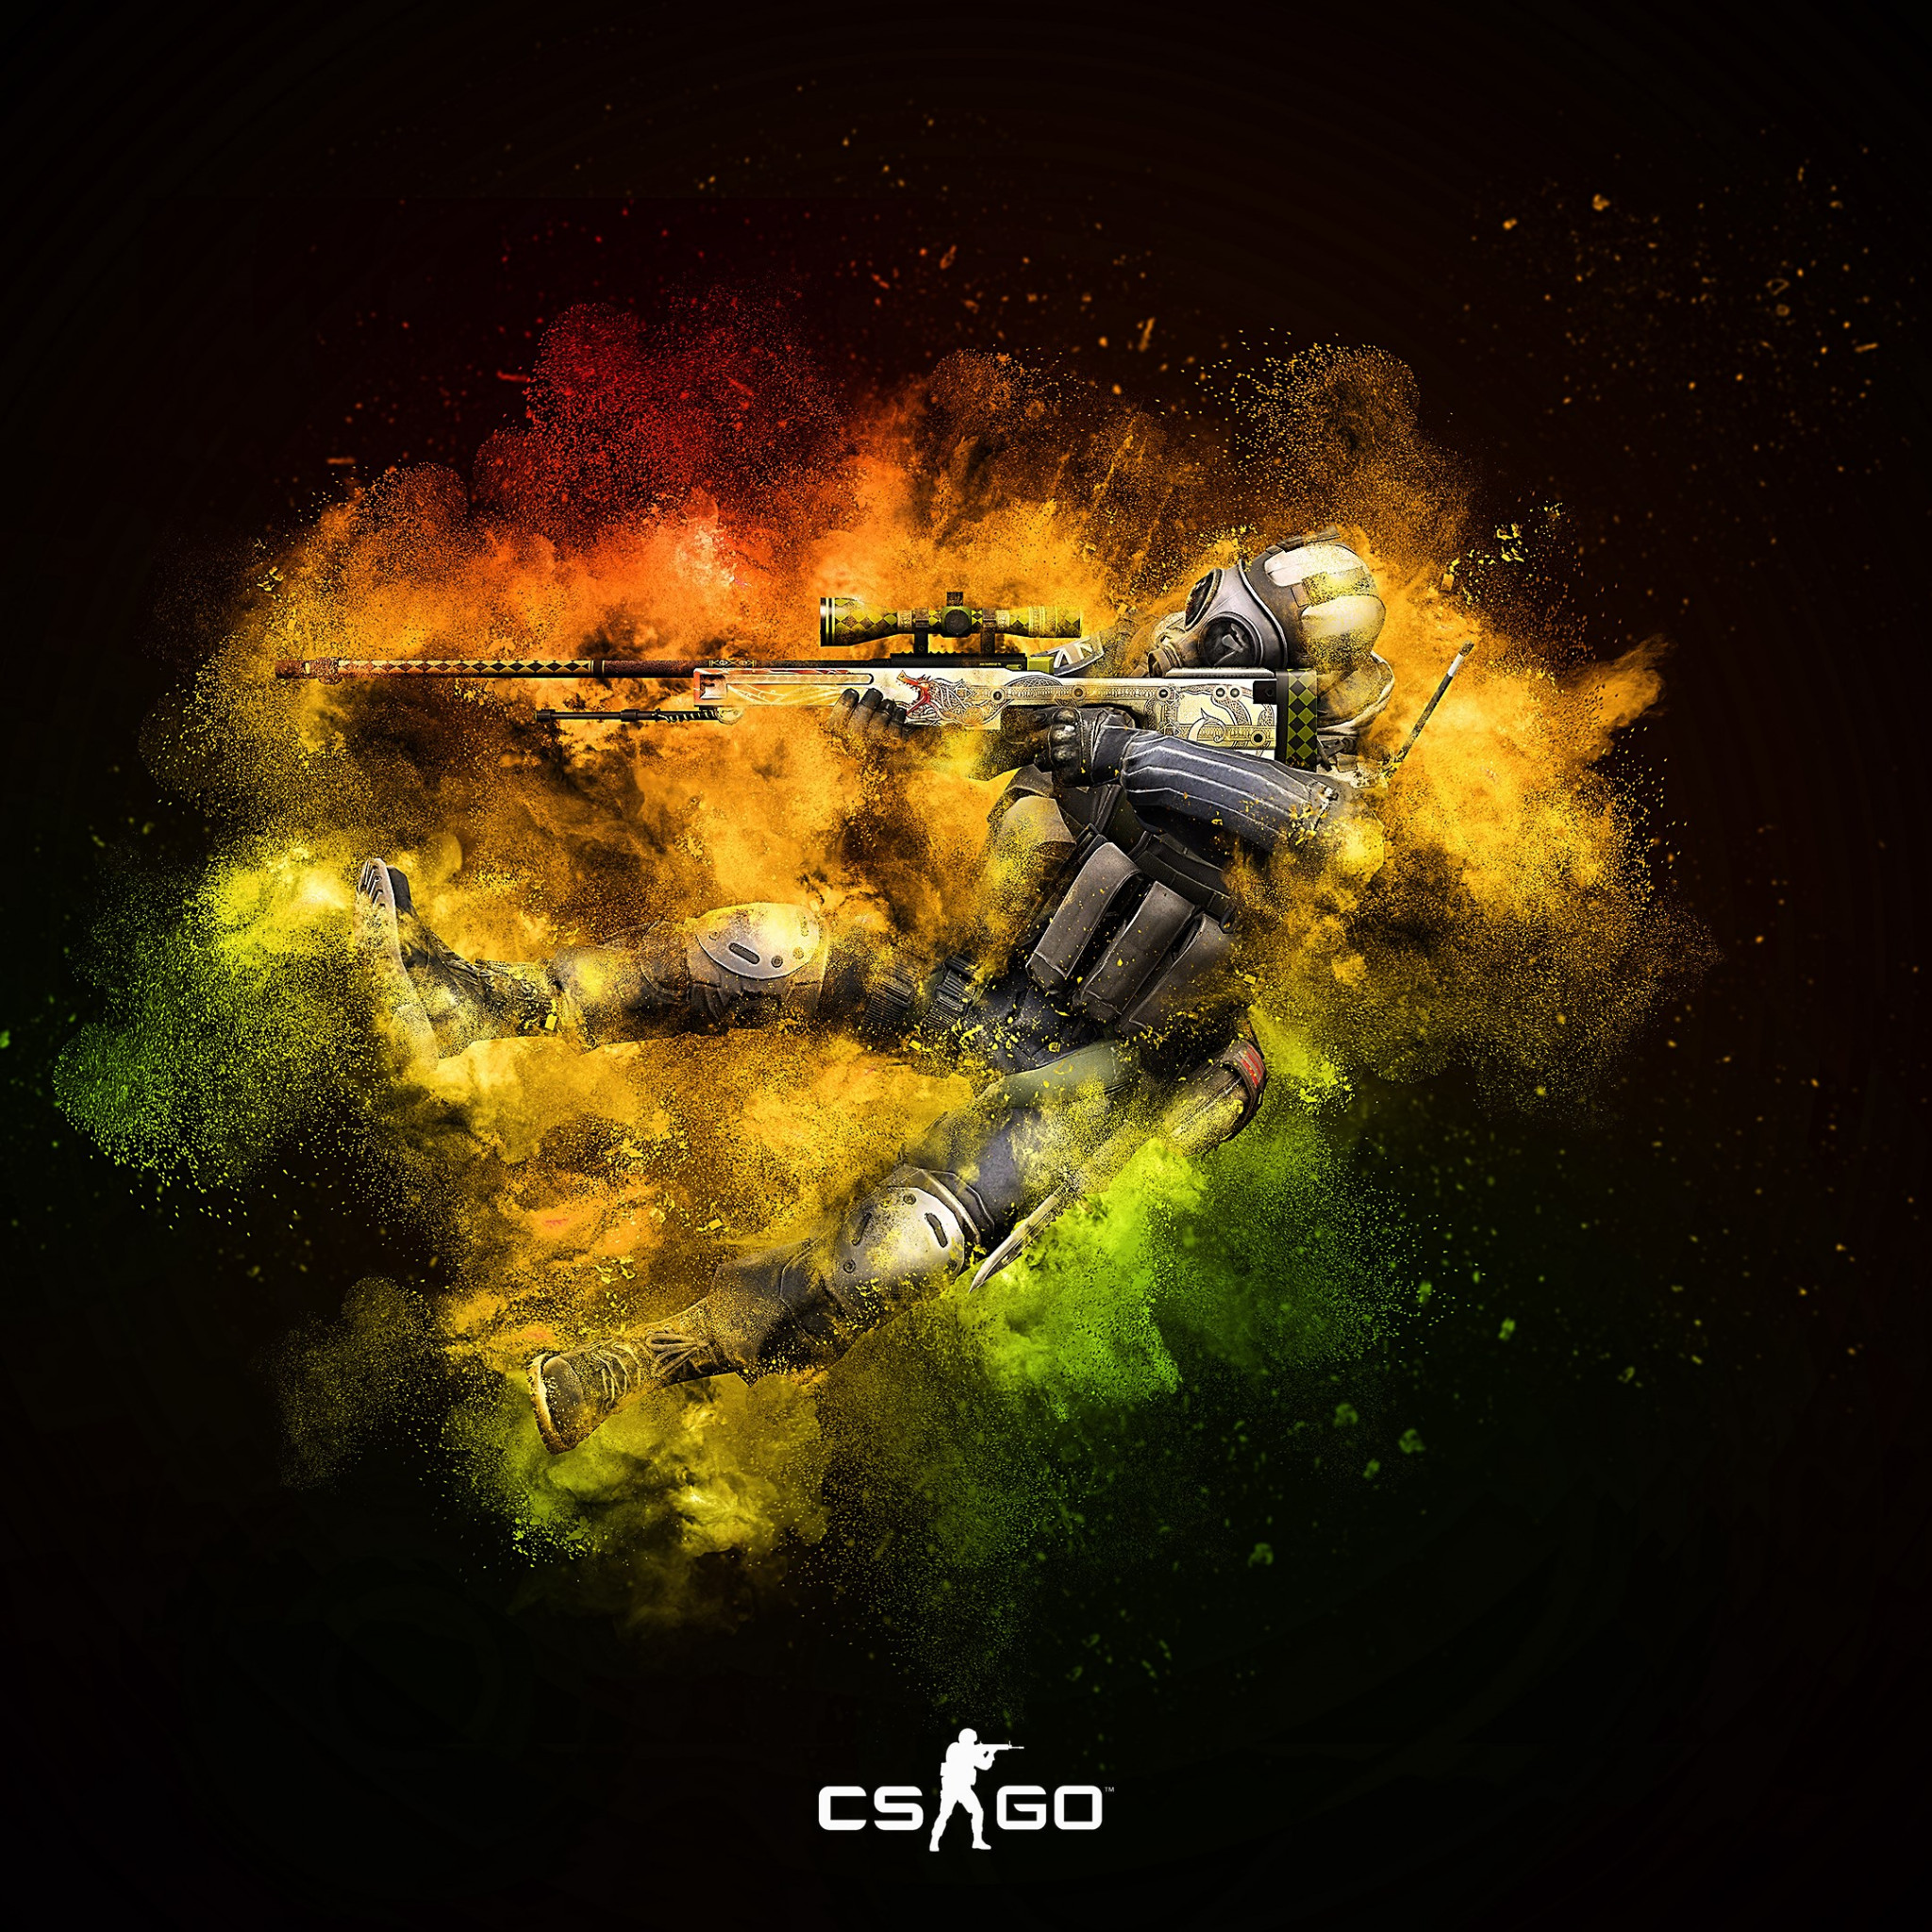 Top 93+ Images 0p counter-strike global offensive wallpapers Latest